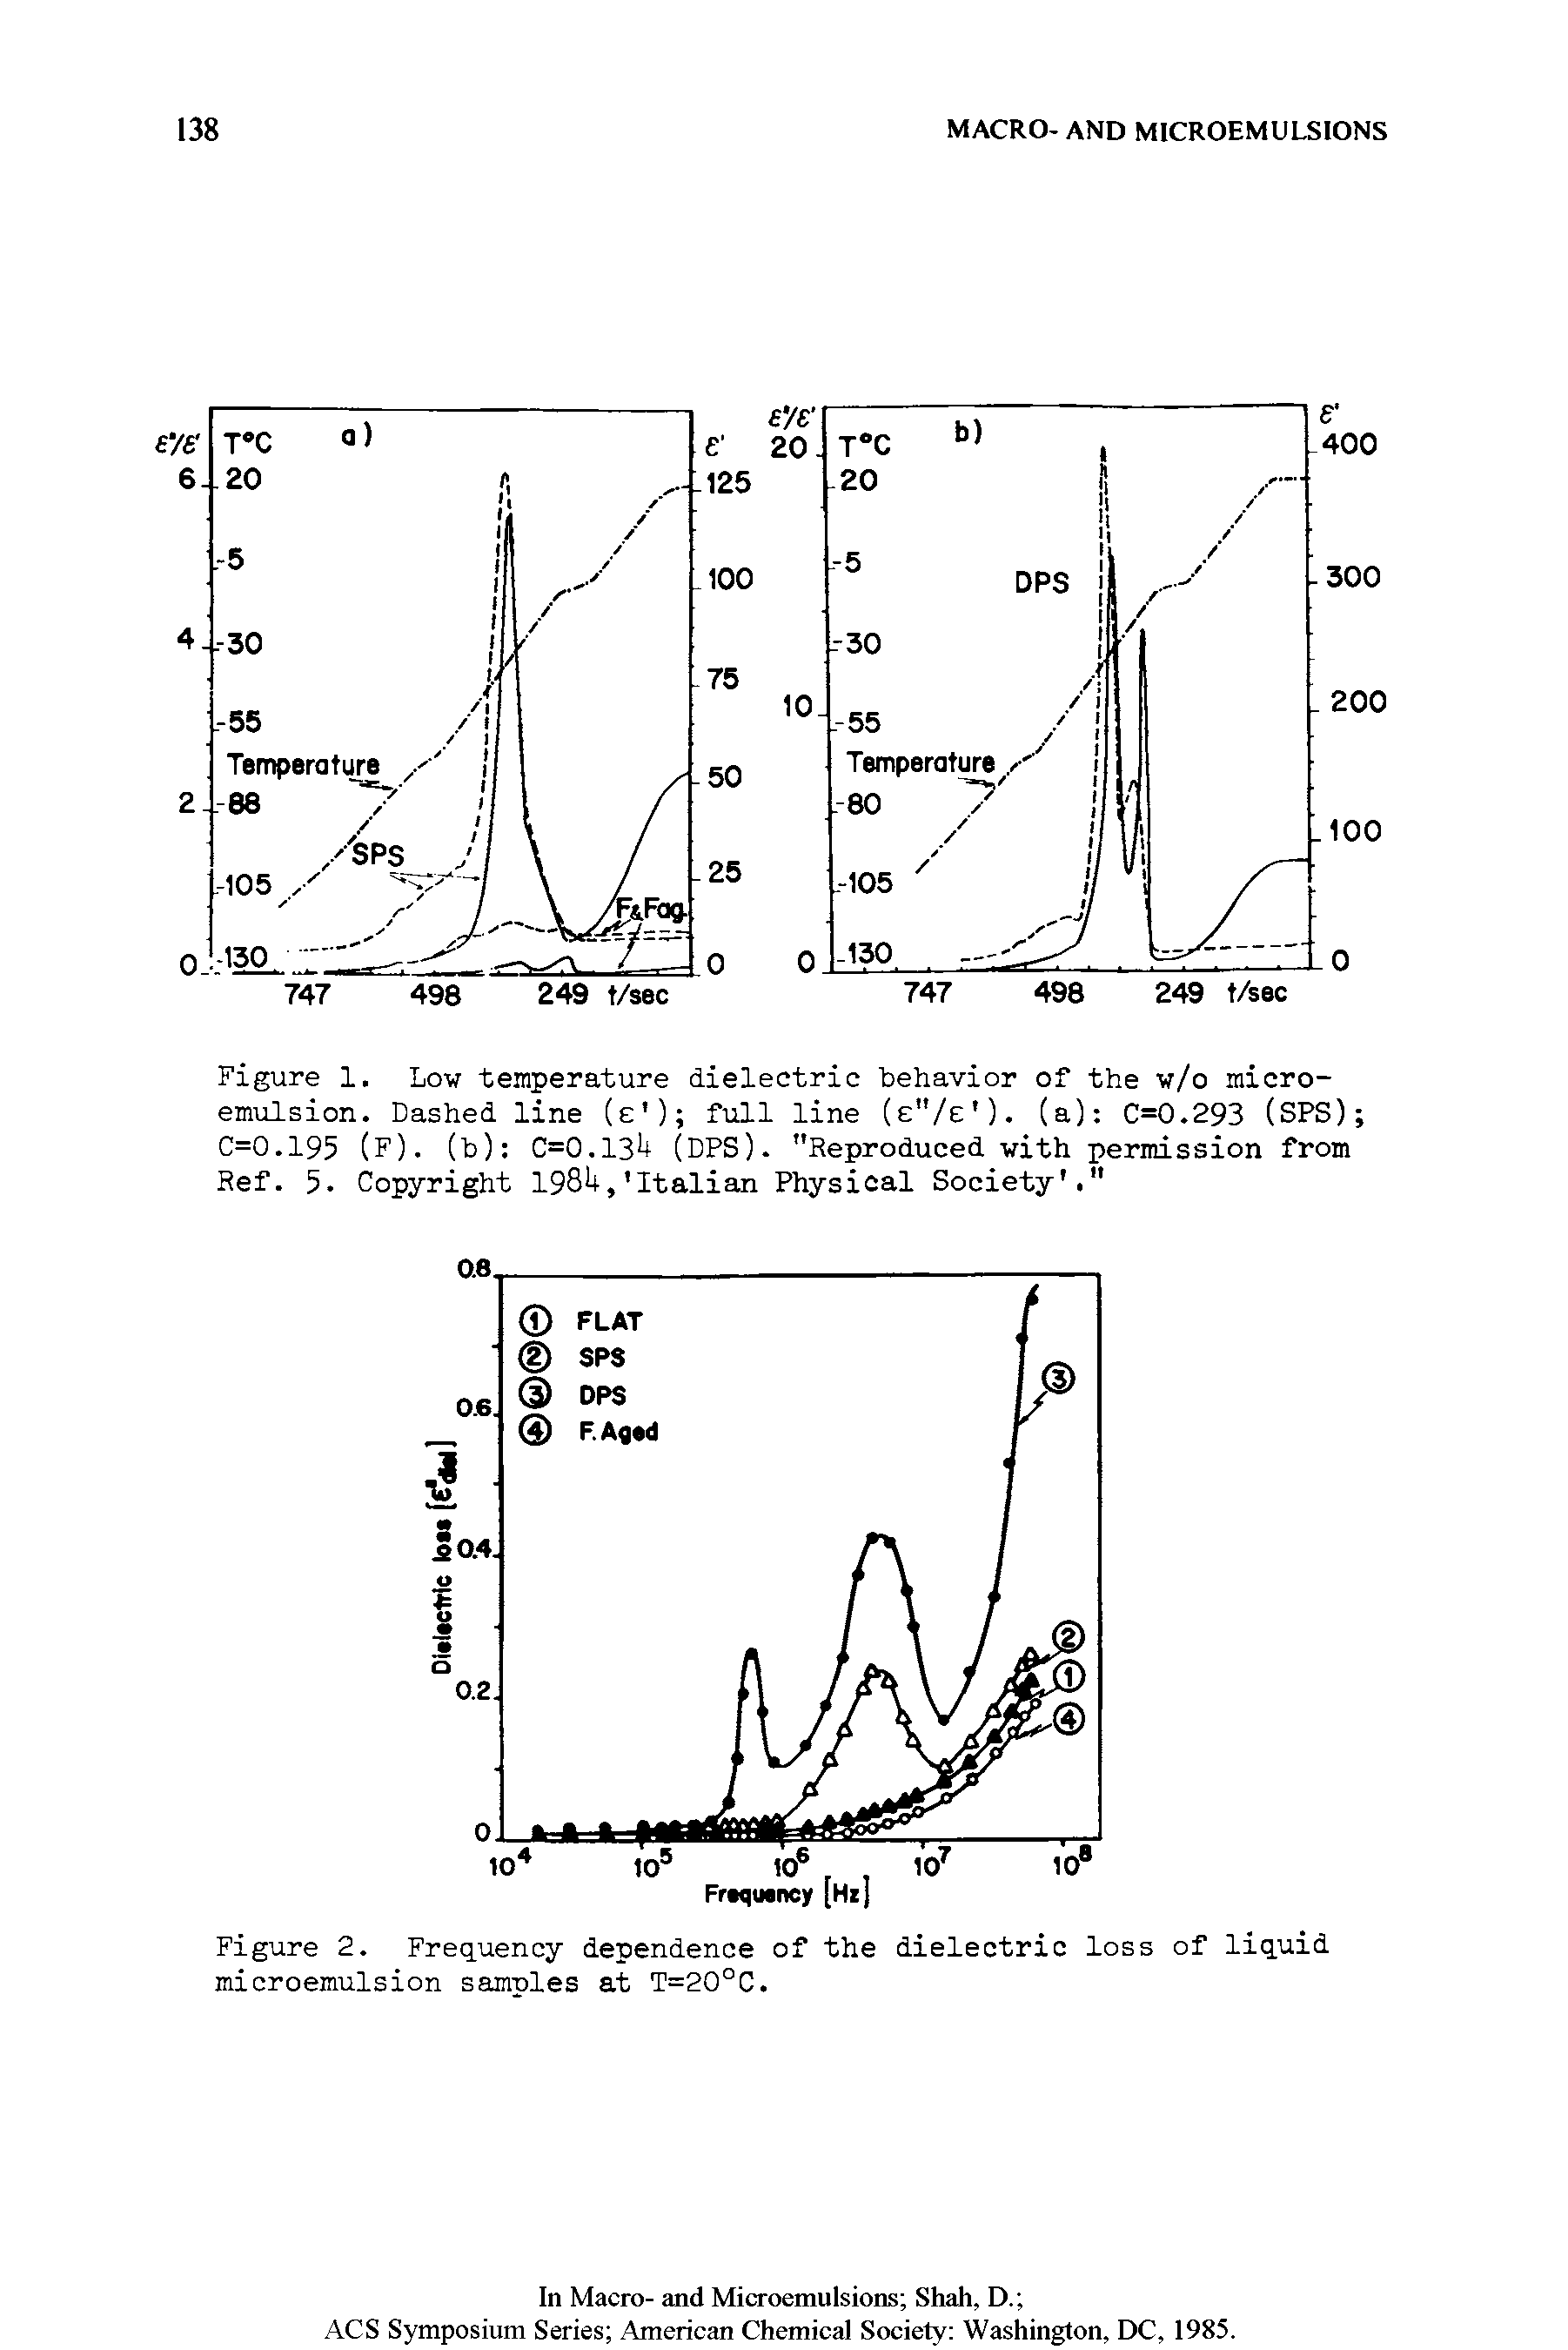 Figure 2. Frequency dependence of the dielectric loss of liquid microemulsion samples at T=20°C.